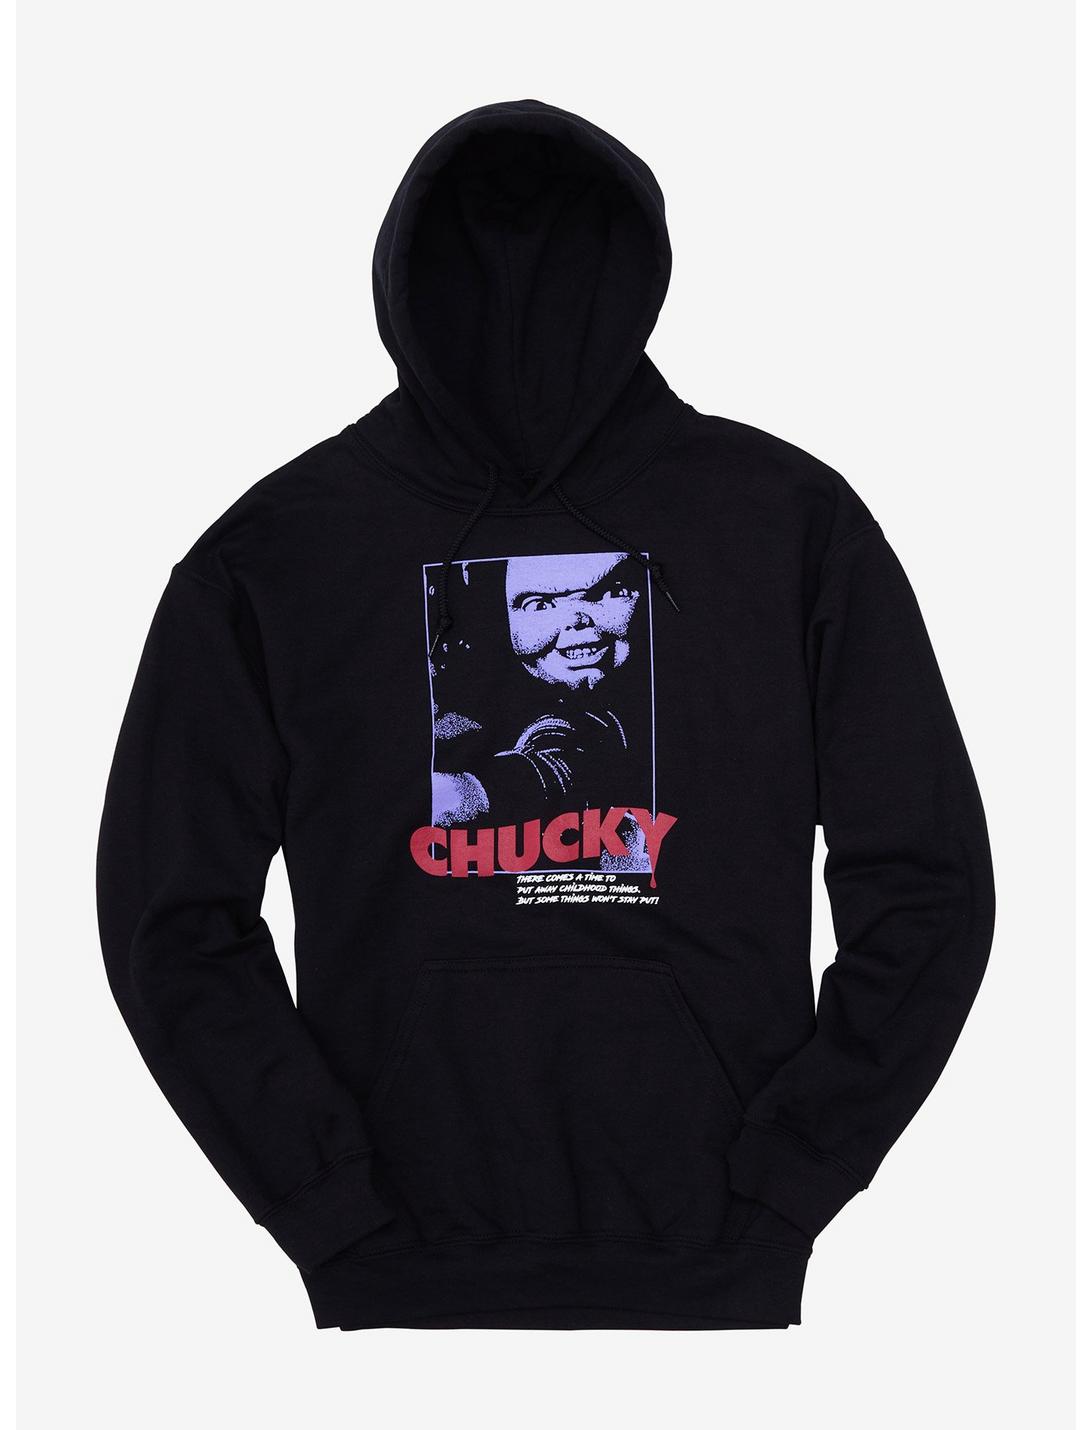 Child's Play Chucky Poster Girls Hoodie, MULTI, hi-res